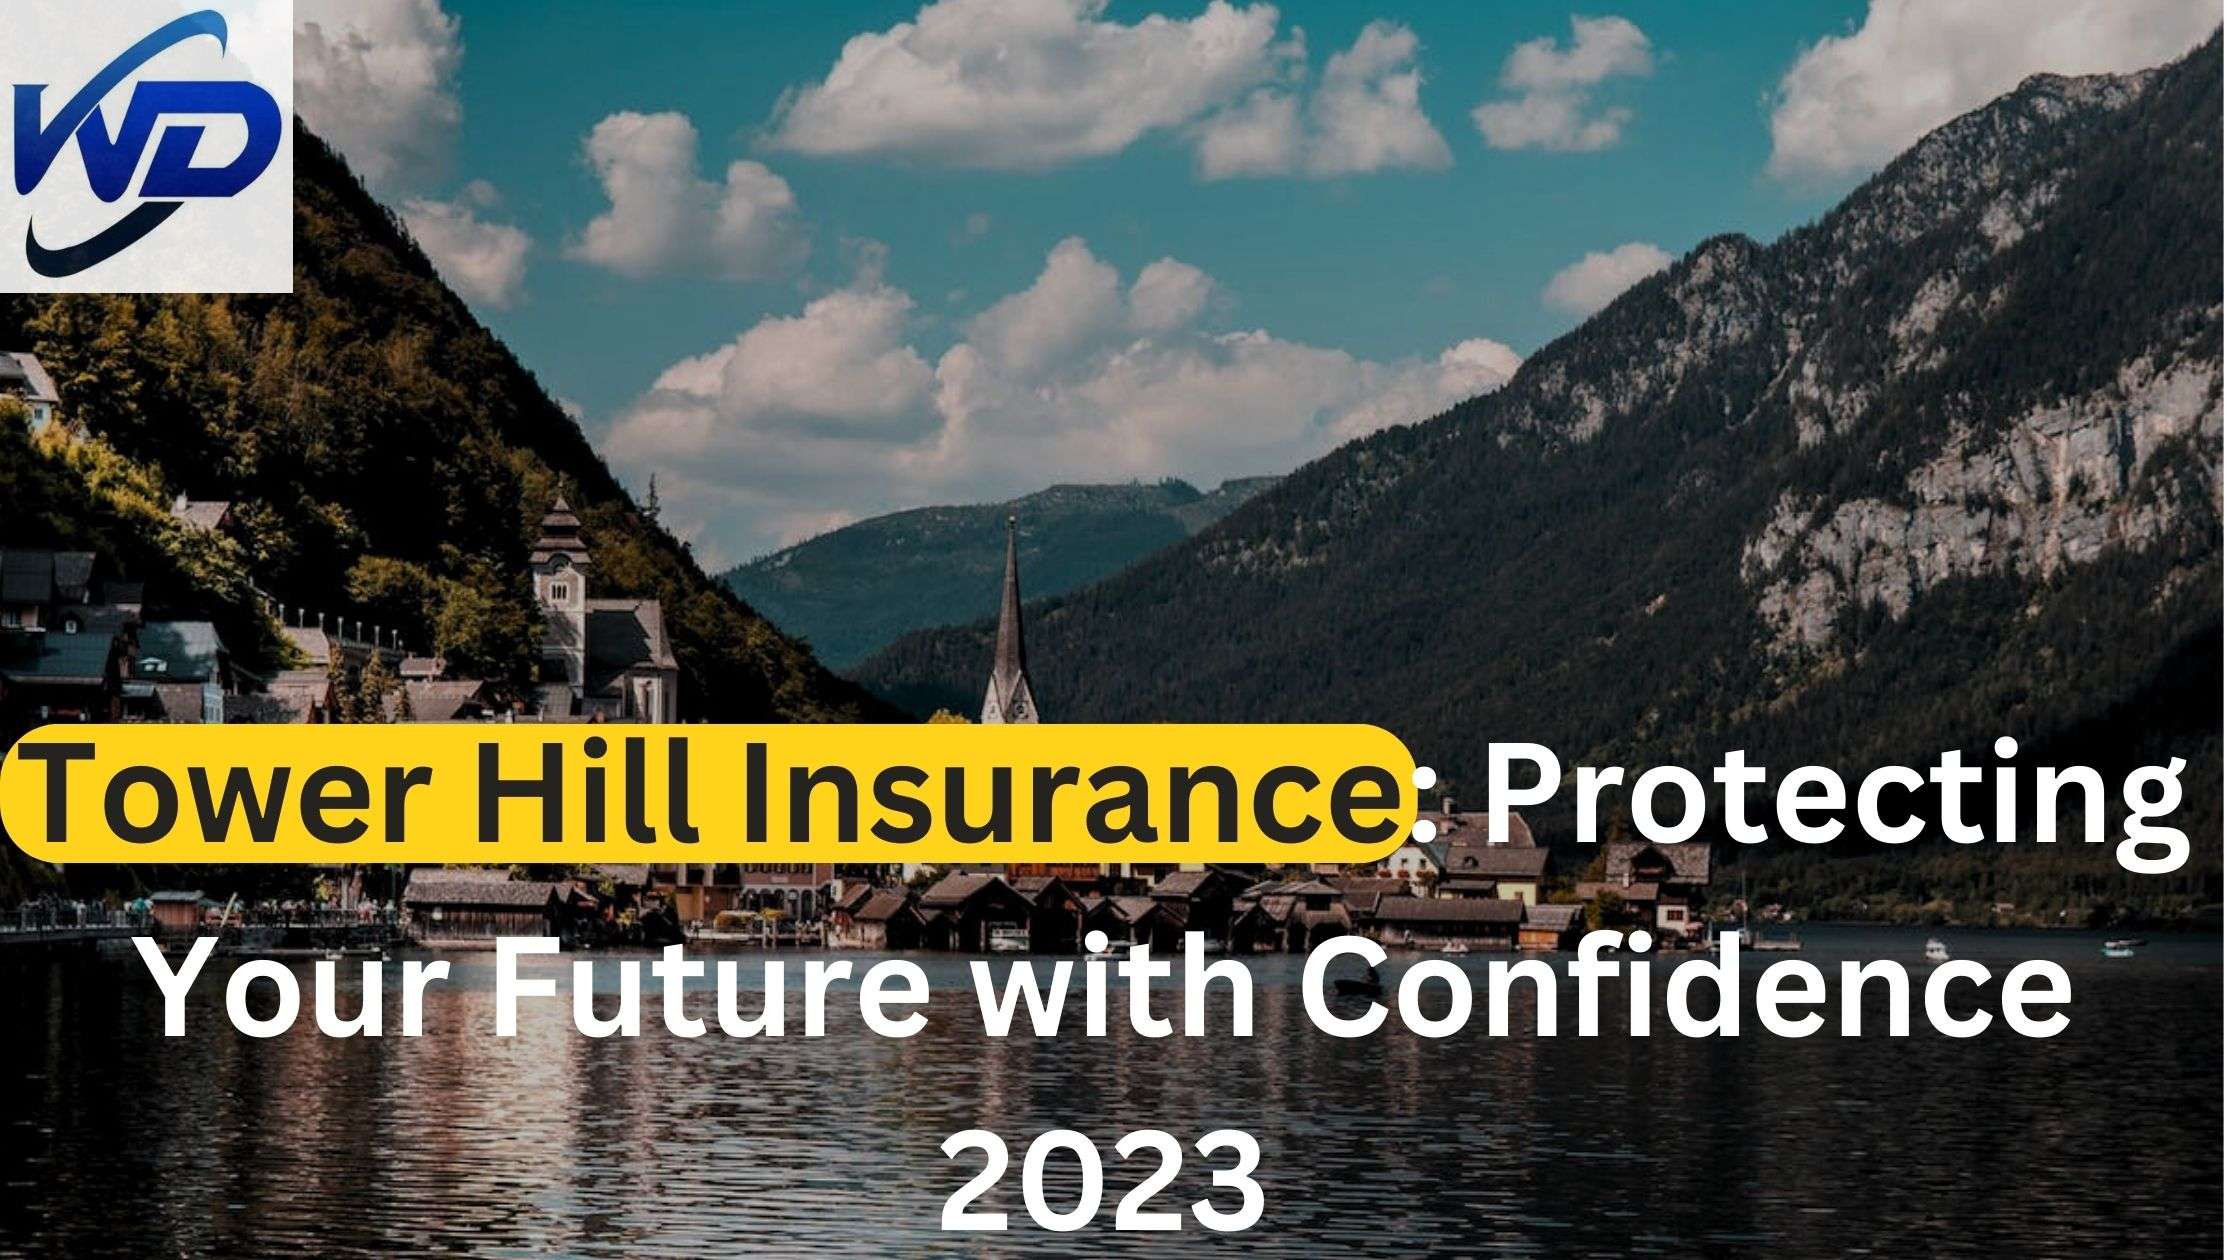 Tower Hill Insurance Protecting Your Future with Confidence 2023